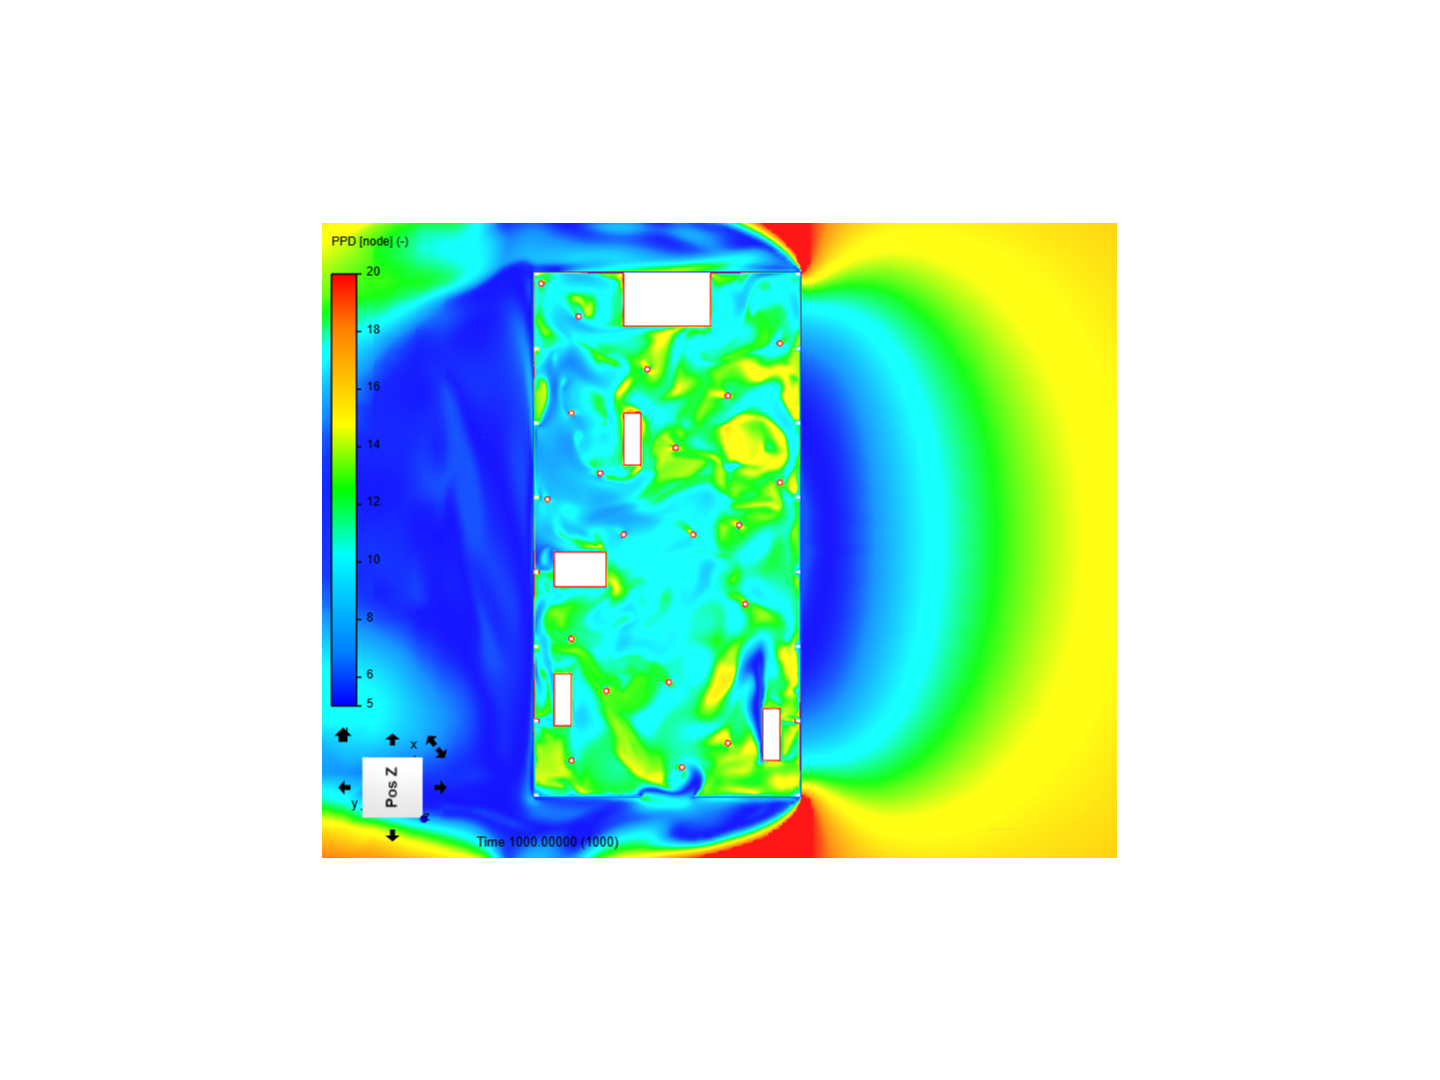 Natural convection in a factory - Thermal Comfort image